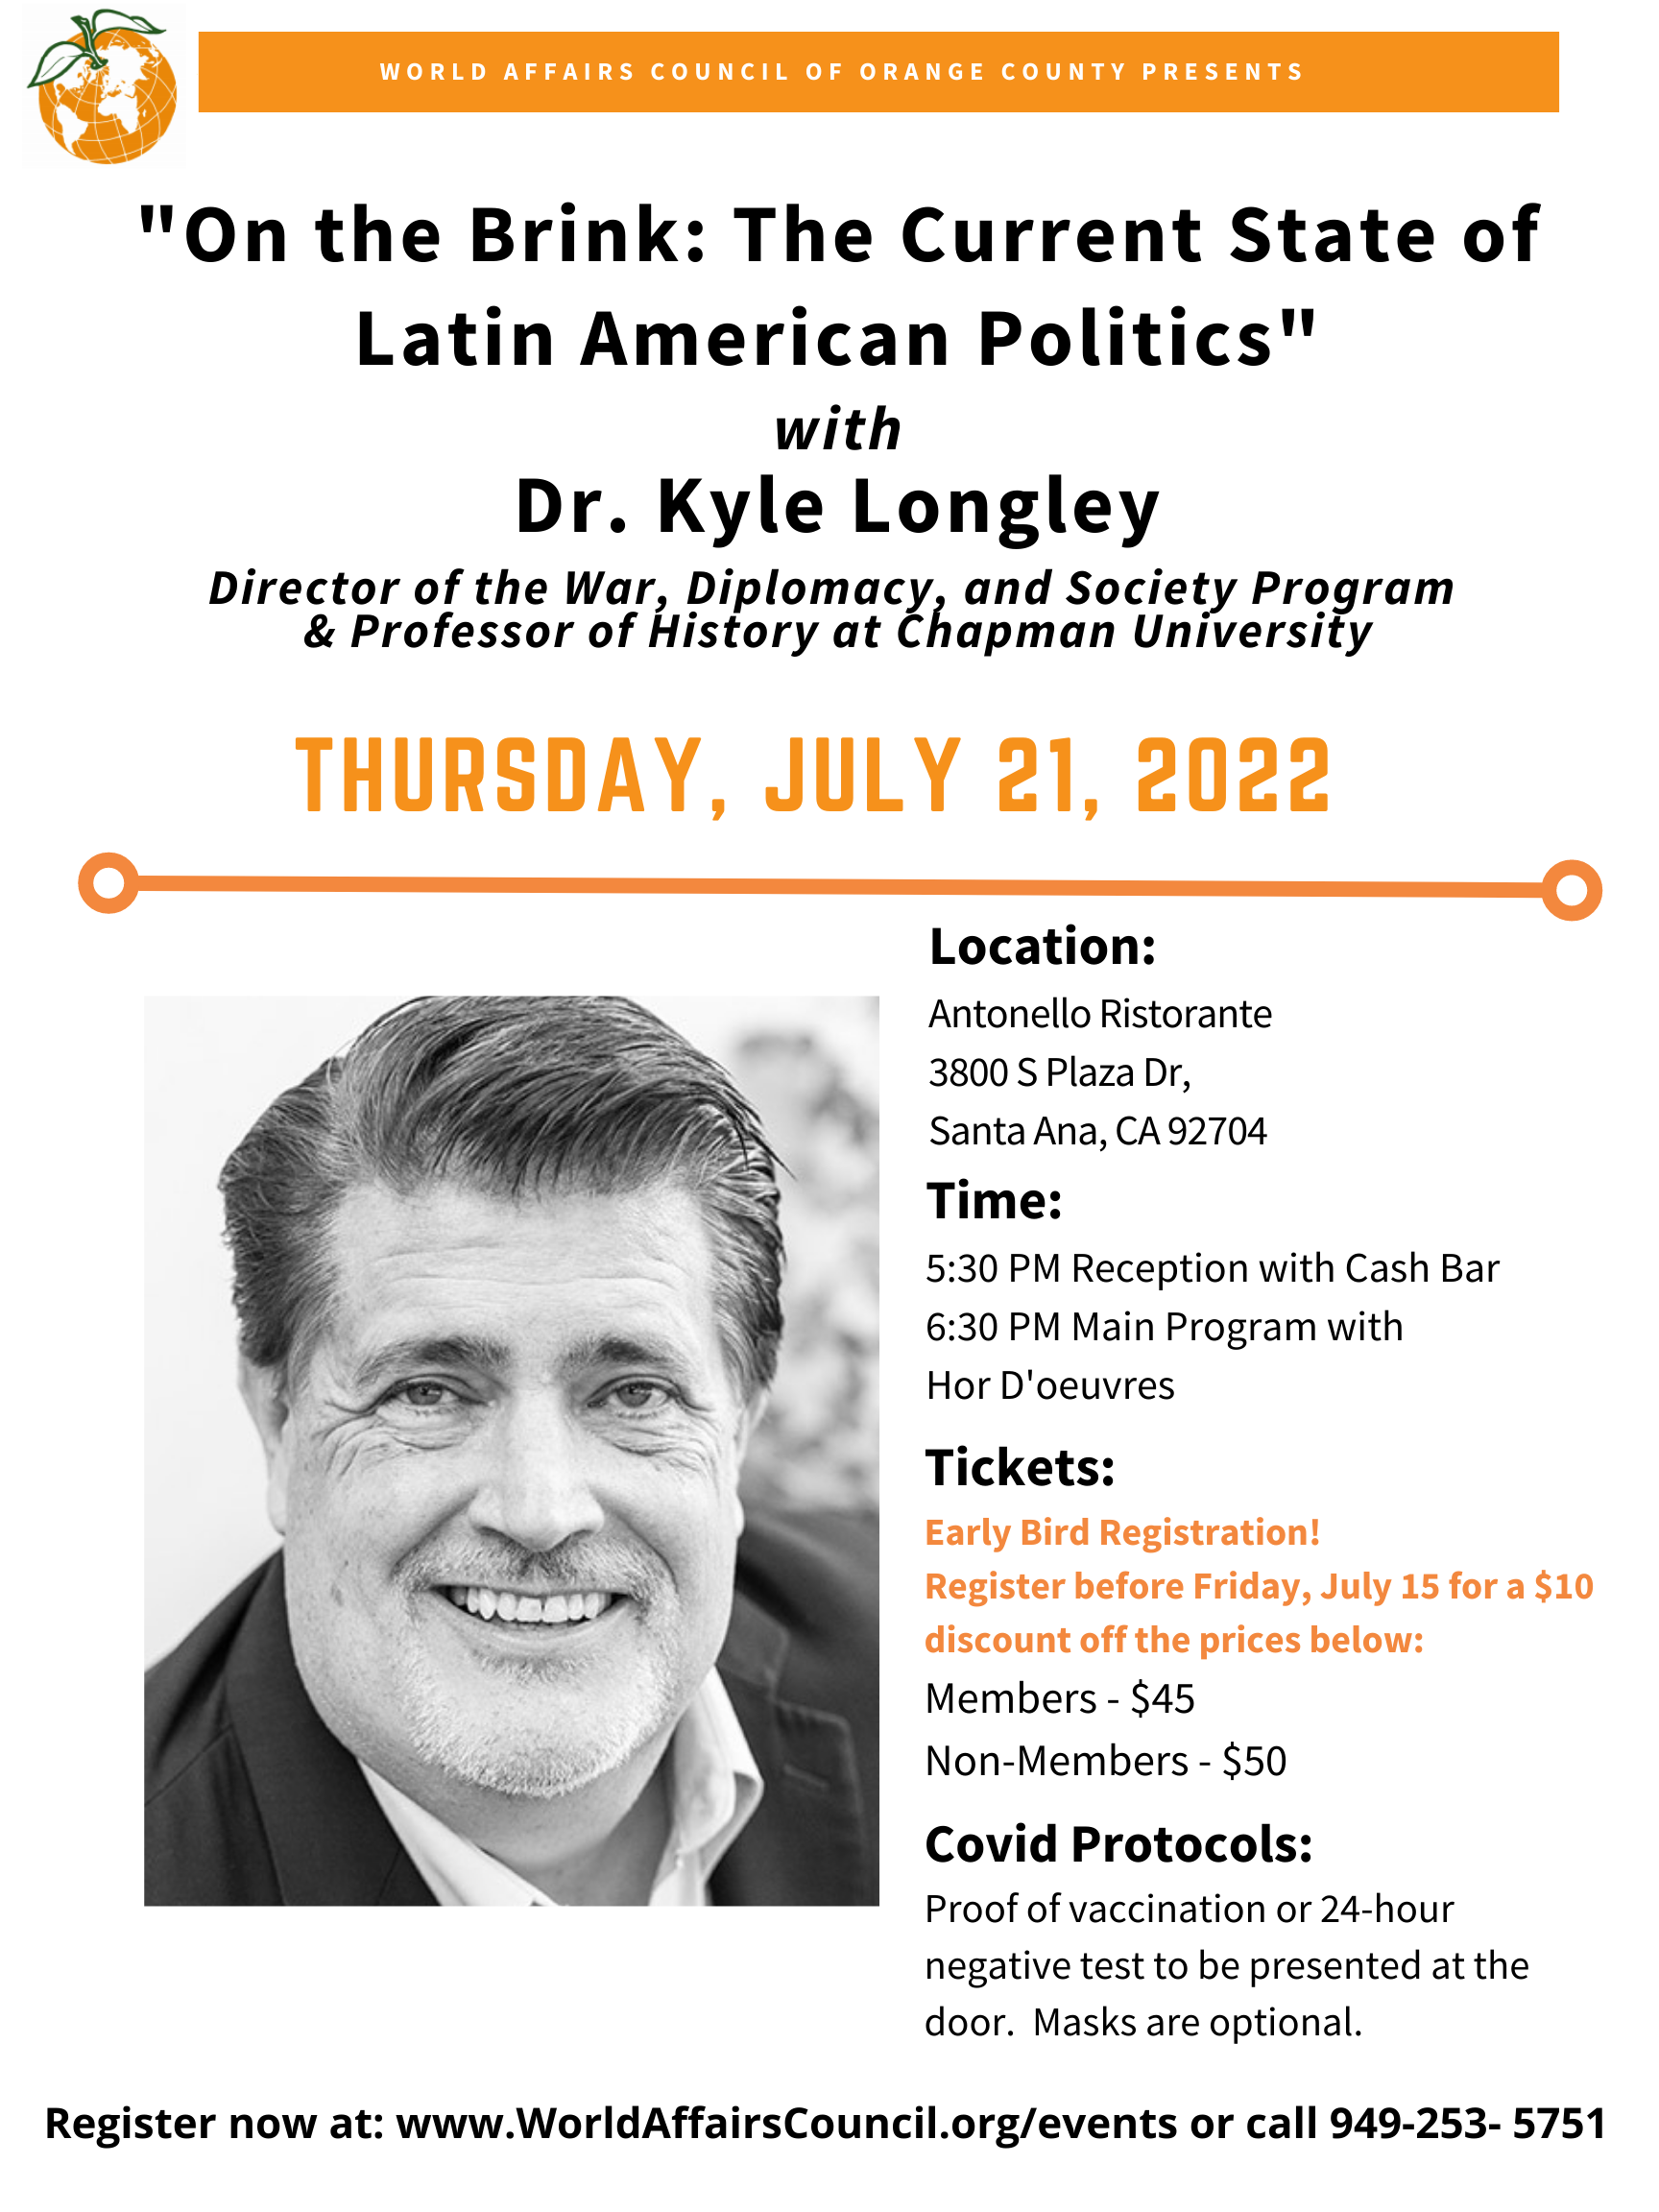 "On the Brink: The Current State of Latin American Politics" with Dr. Kyle Longley